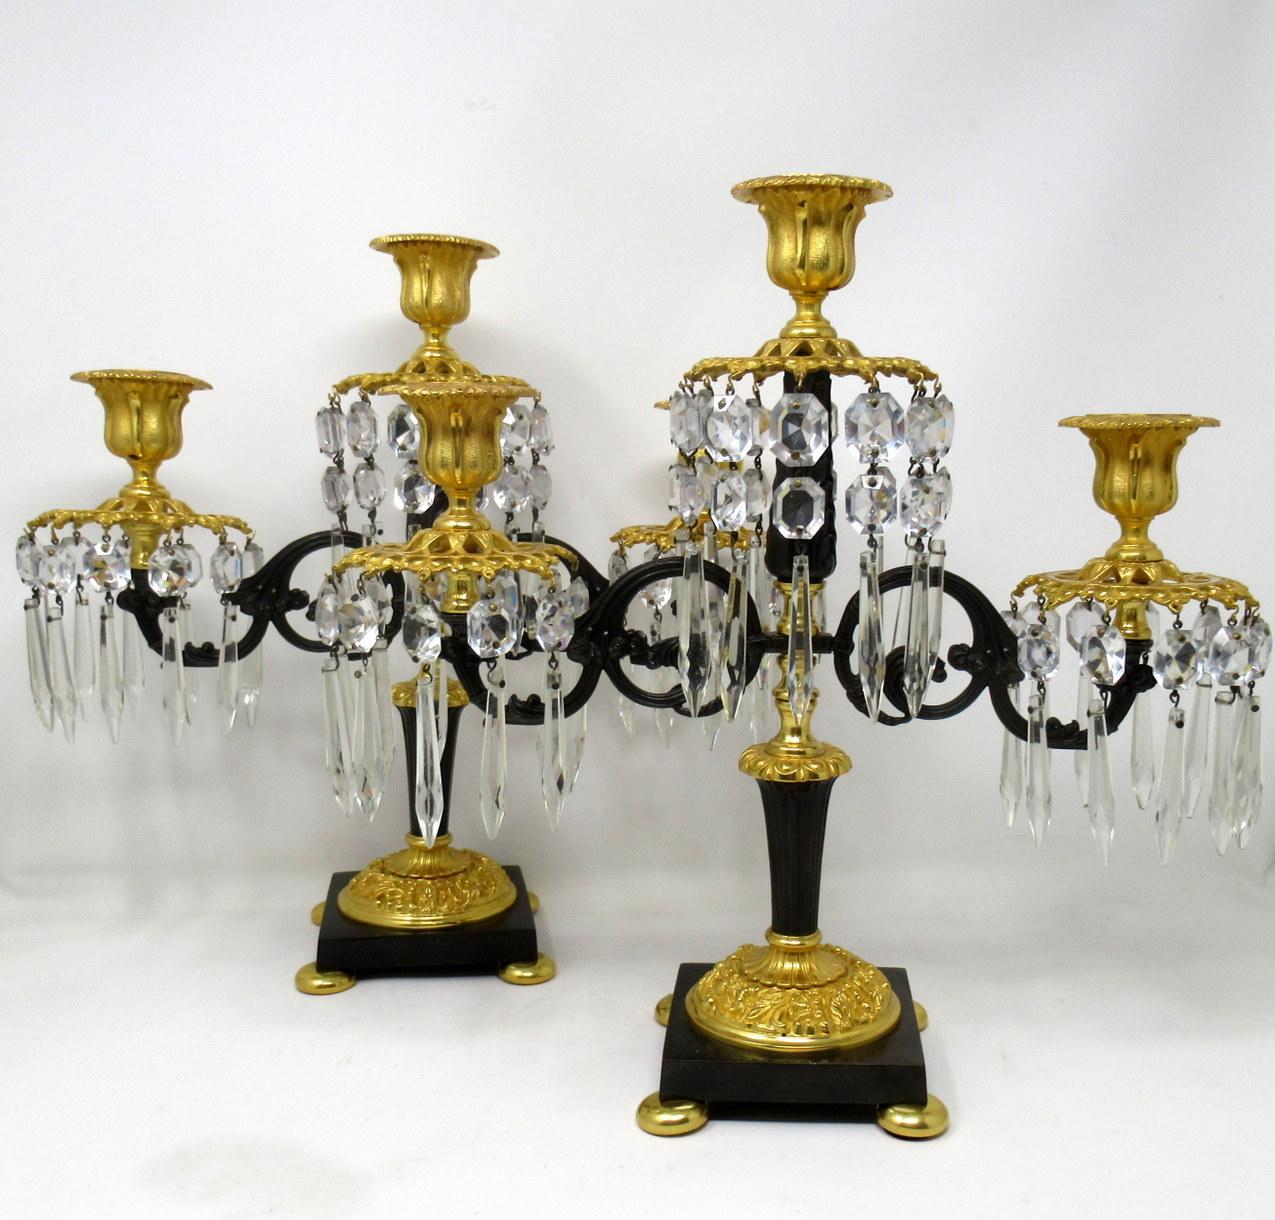 Stunning pair of French Louis XV style patinated bronze doré and ormolu three light candelabra, after a model by Pierre Gouthiere (1732-1813), mid-19th century

Each with a centered empire style bronze reeded support, issuing two decorative